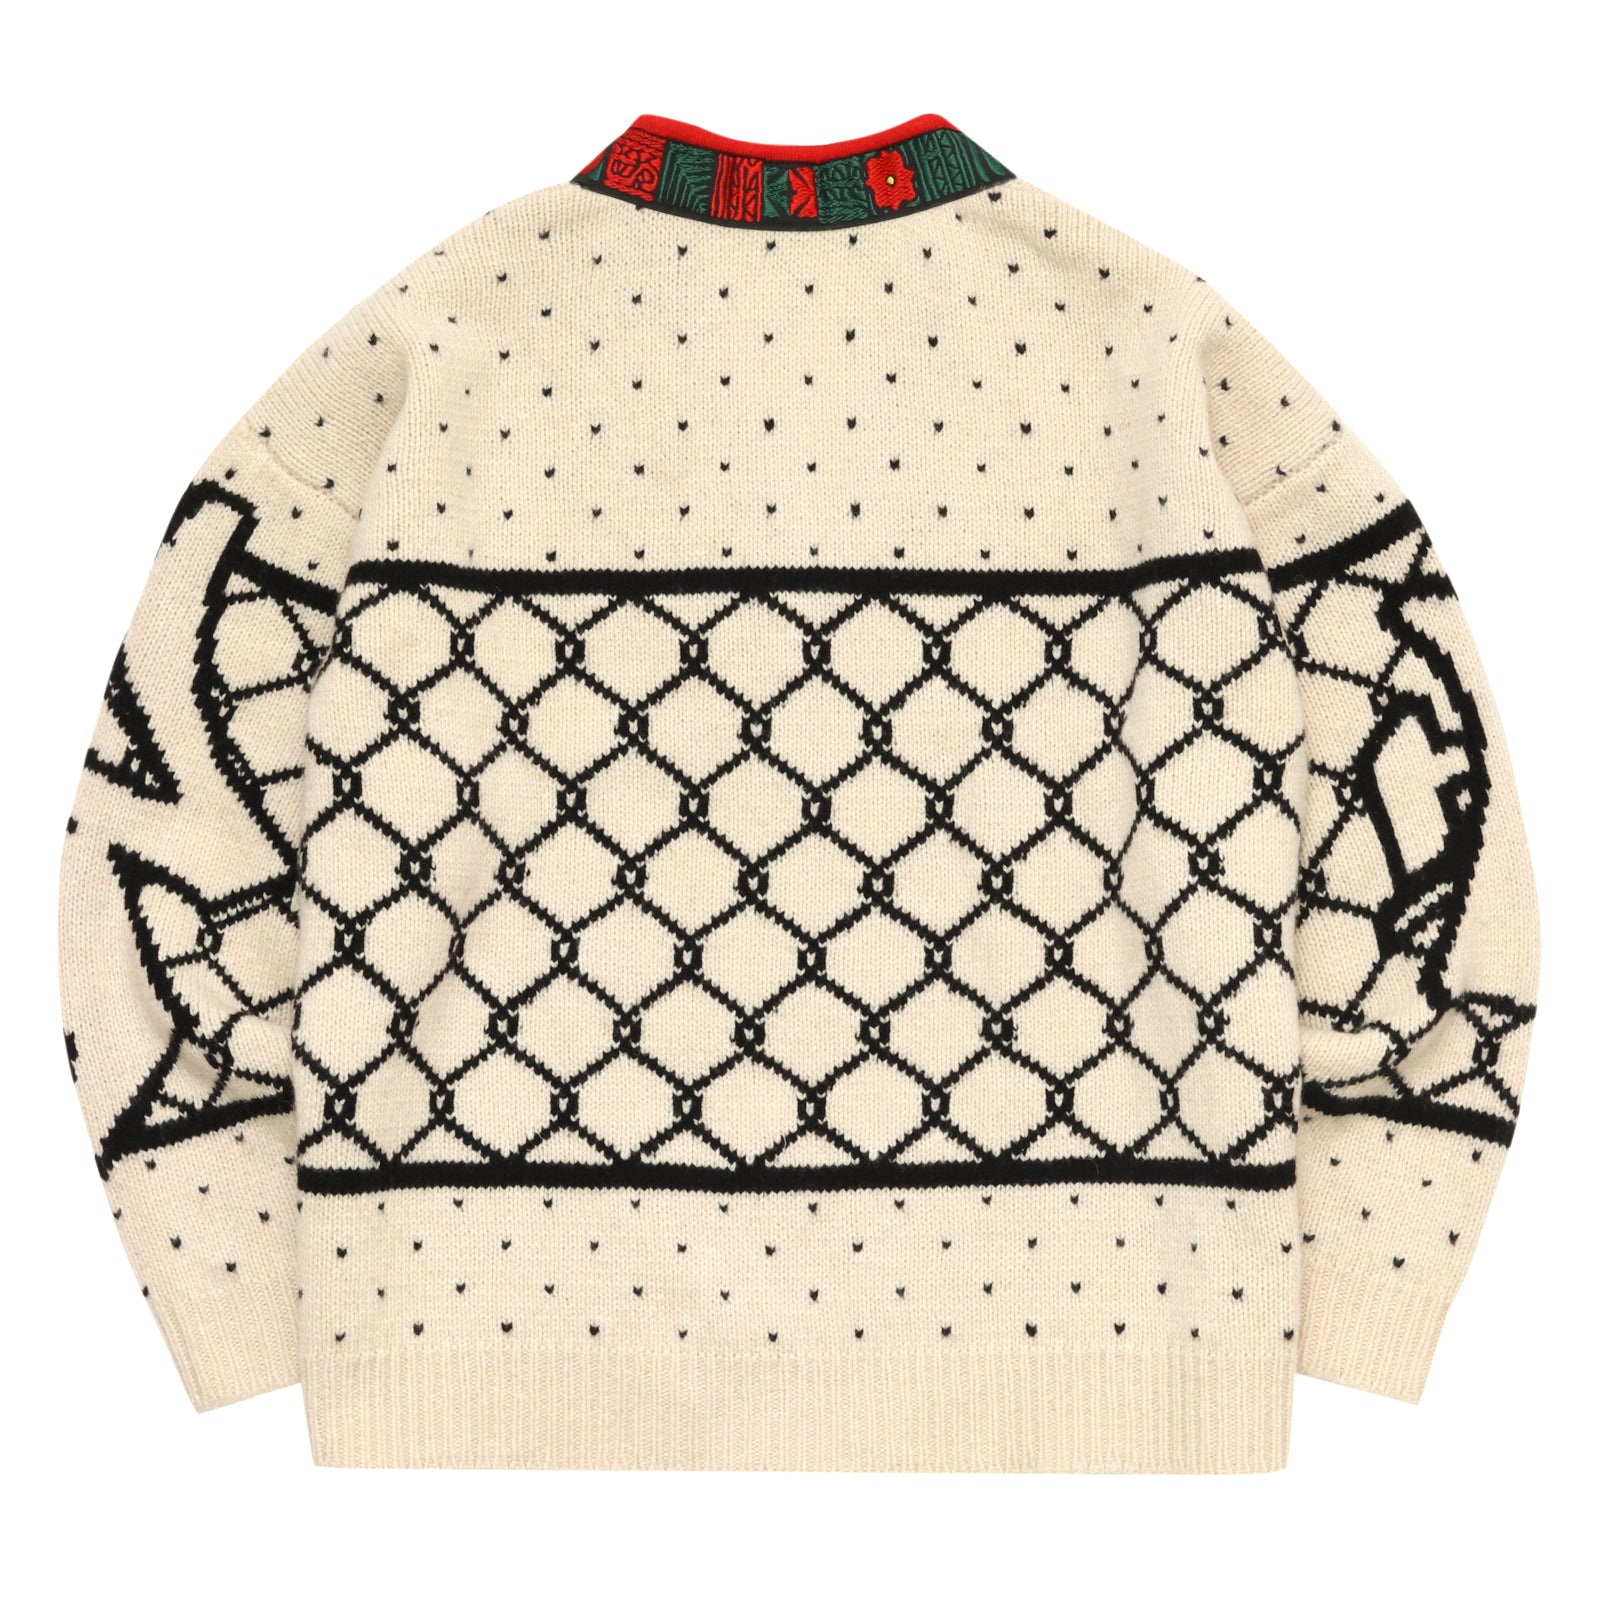 WHIMSY/ Tyrolean Sweater – Re'verth ONLINE SHOP